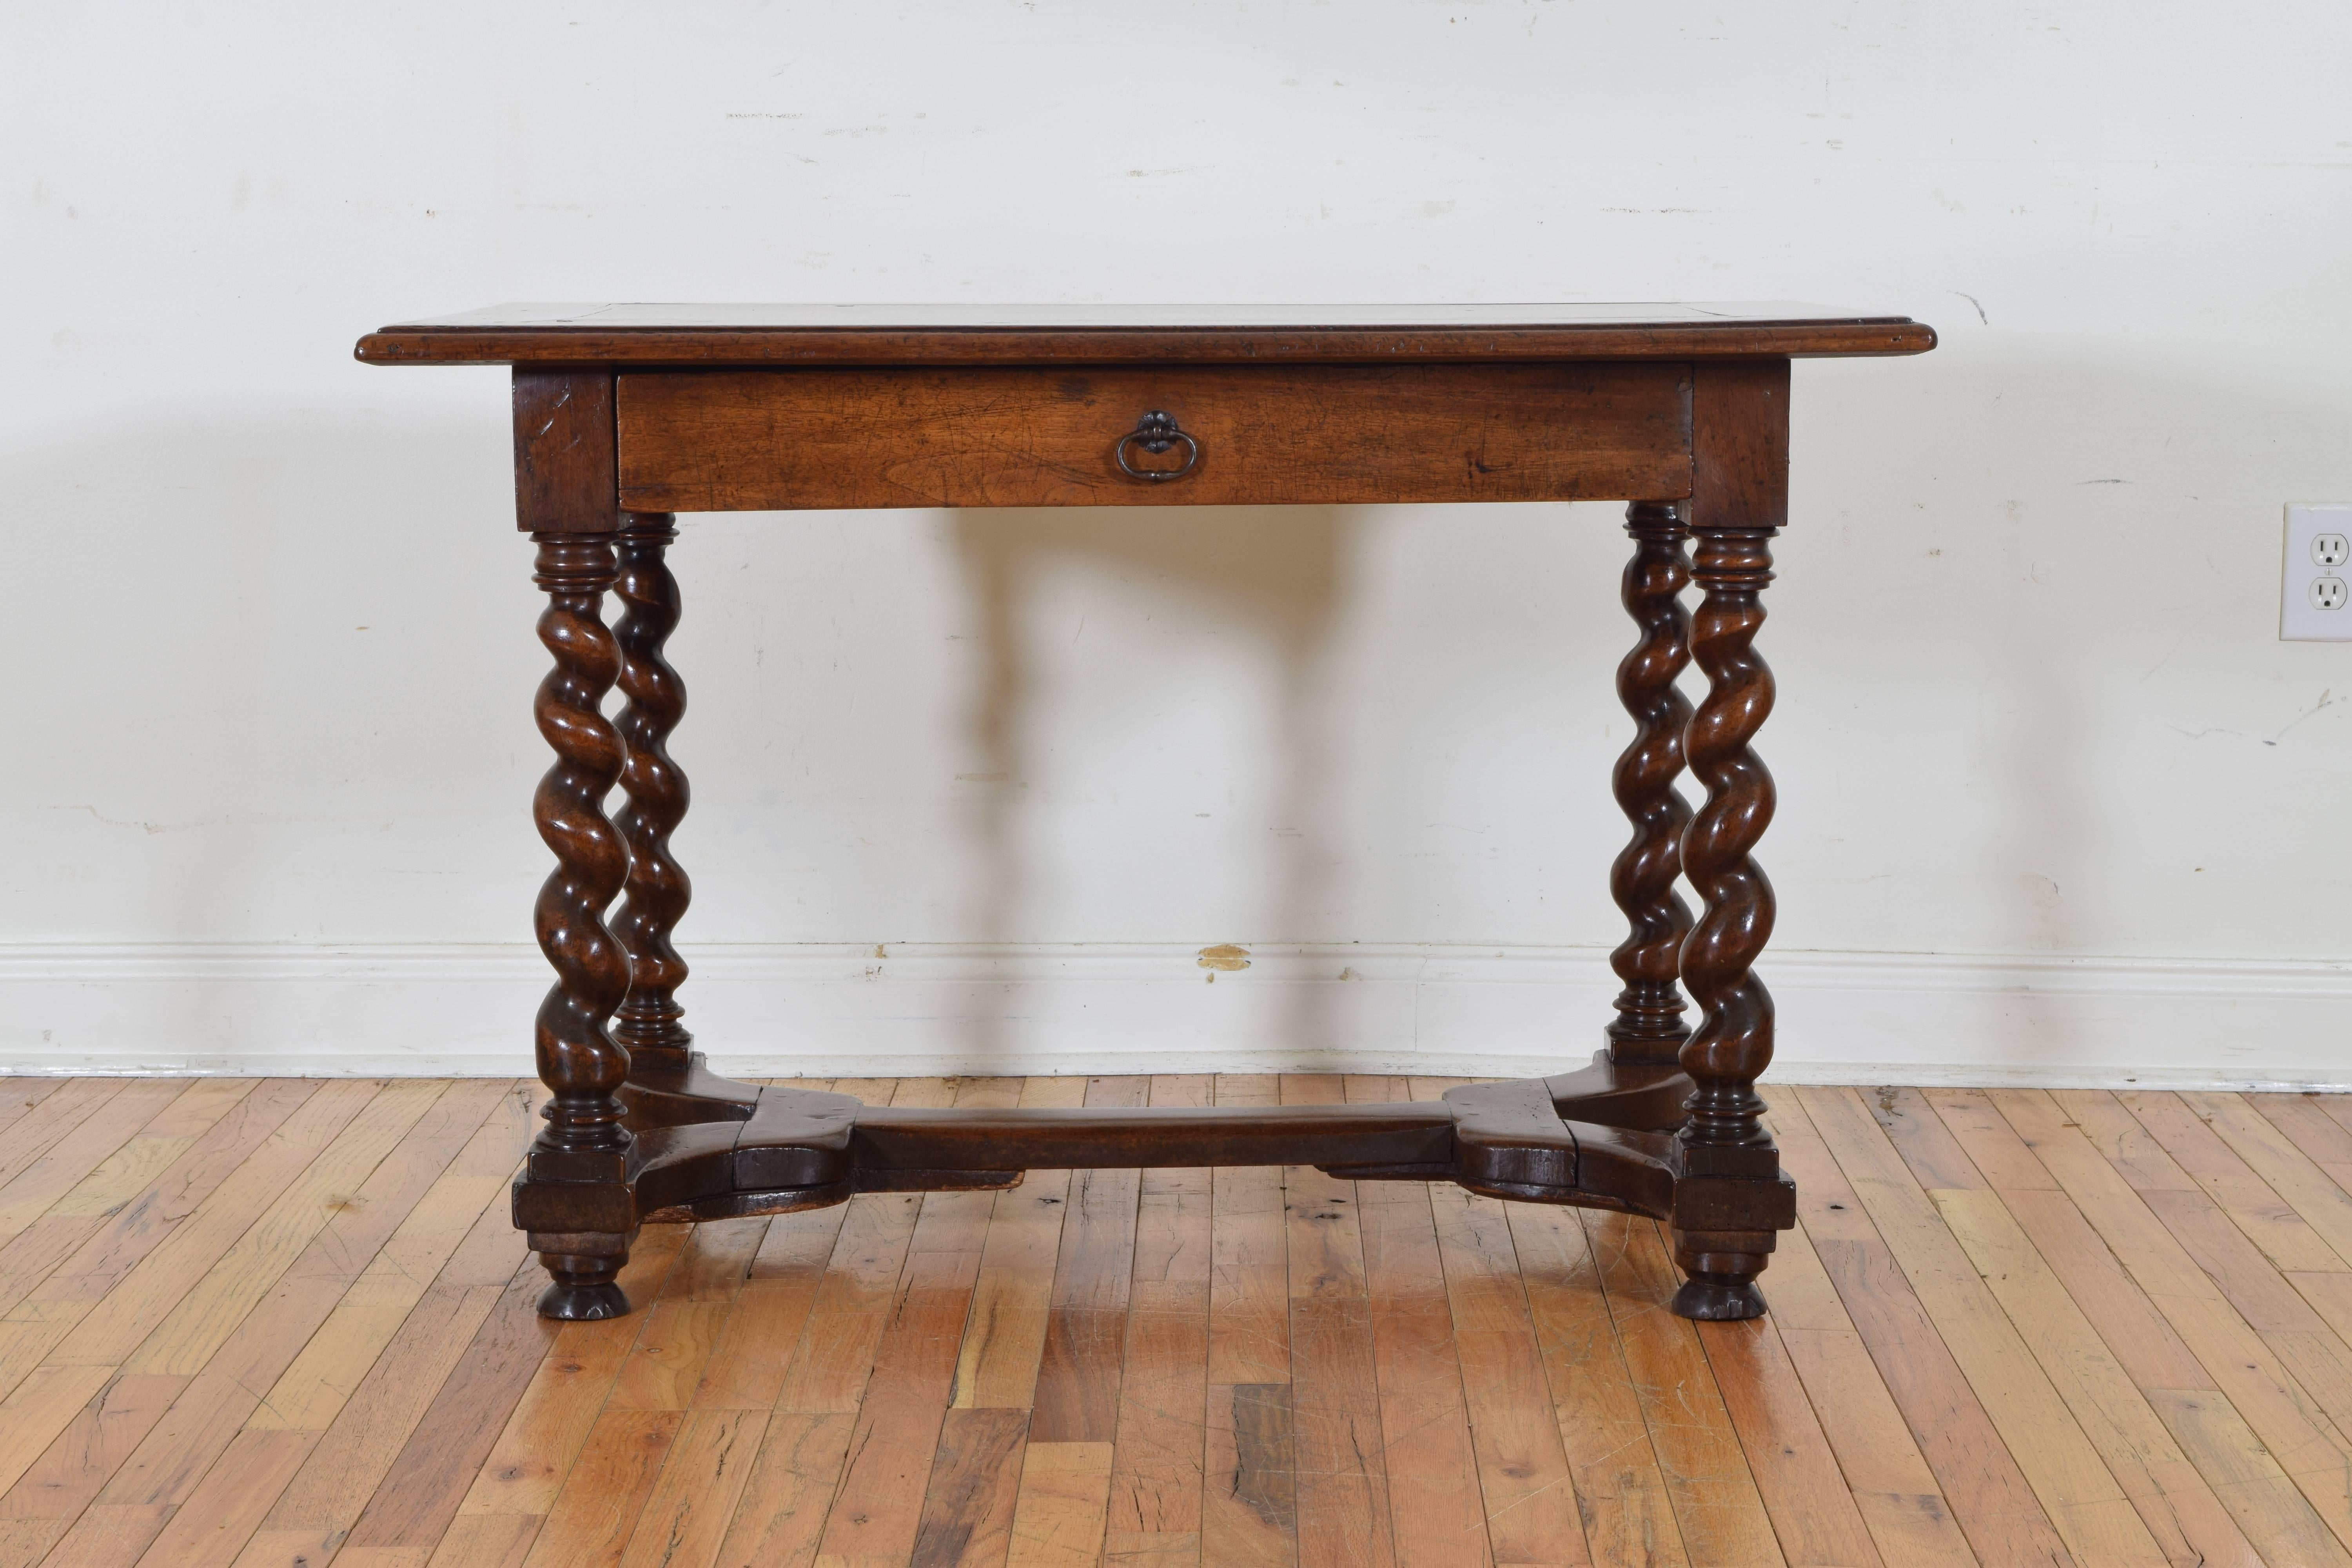 the rectangular top with framed and molded edges above case housing one drawer with an iron pull, raised on beautifully spiral turned legs joined by an elongated x-form stretcher, the stretcher atop half-bun feet
18th century